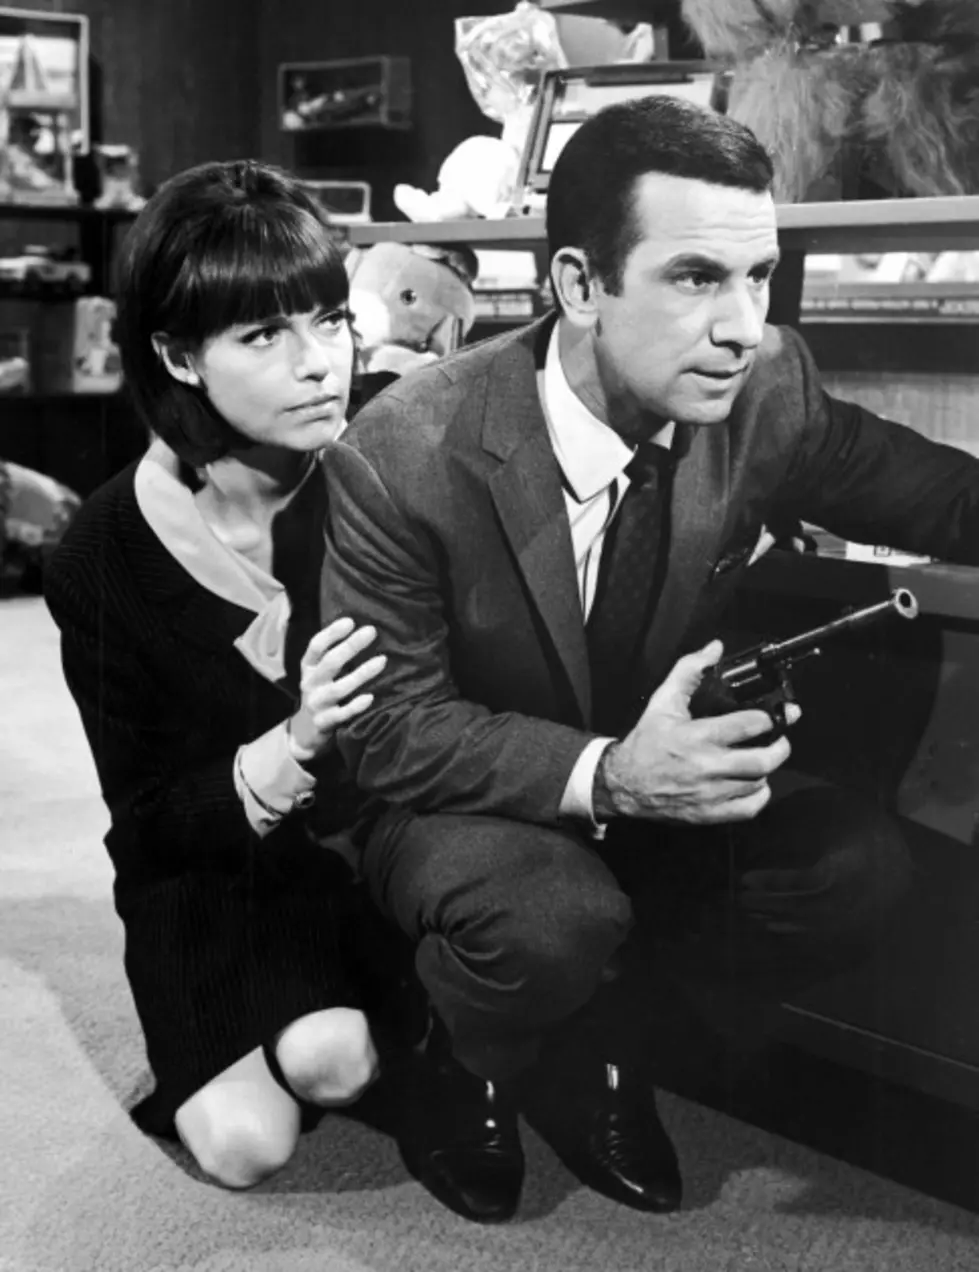 &#8216;Get Smart&#8217; TV Show Gets Us Laughing In 1965 [VIDEO]